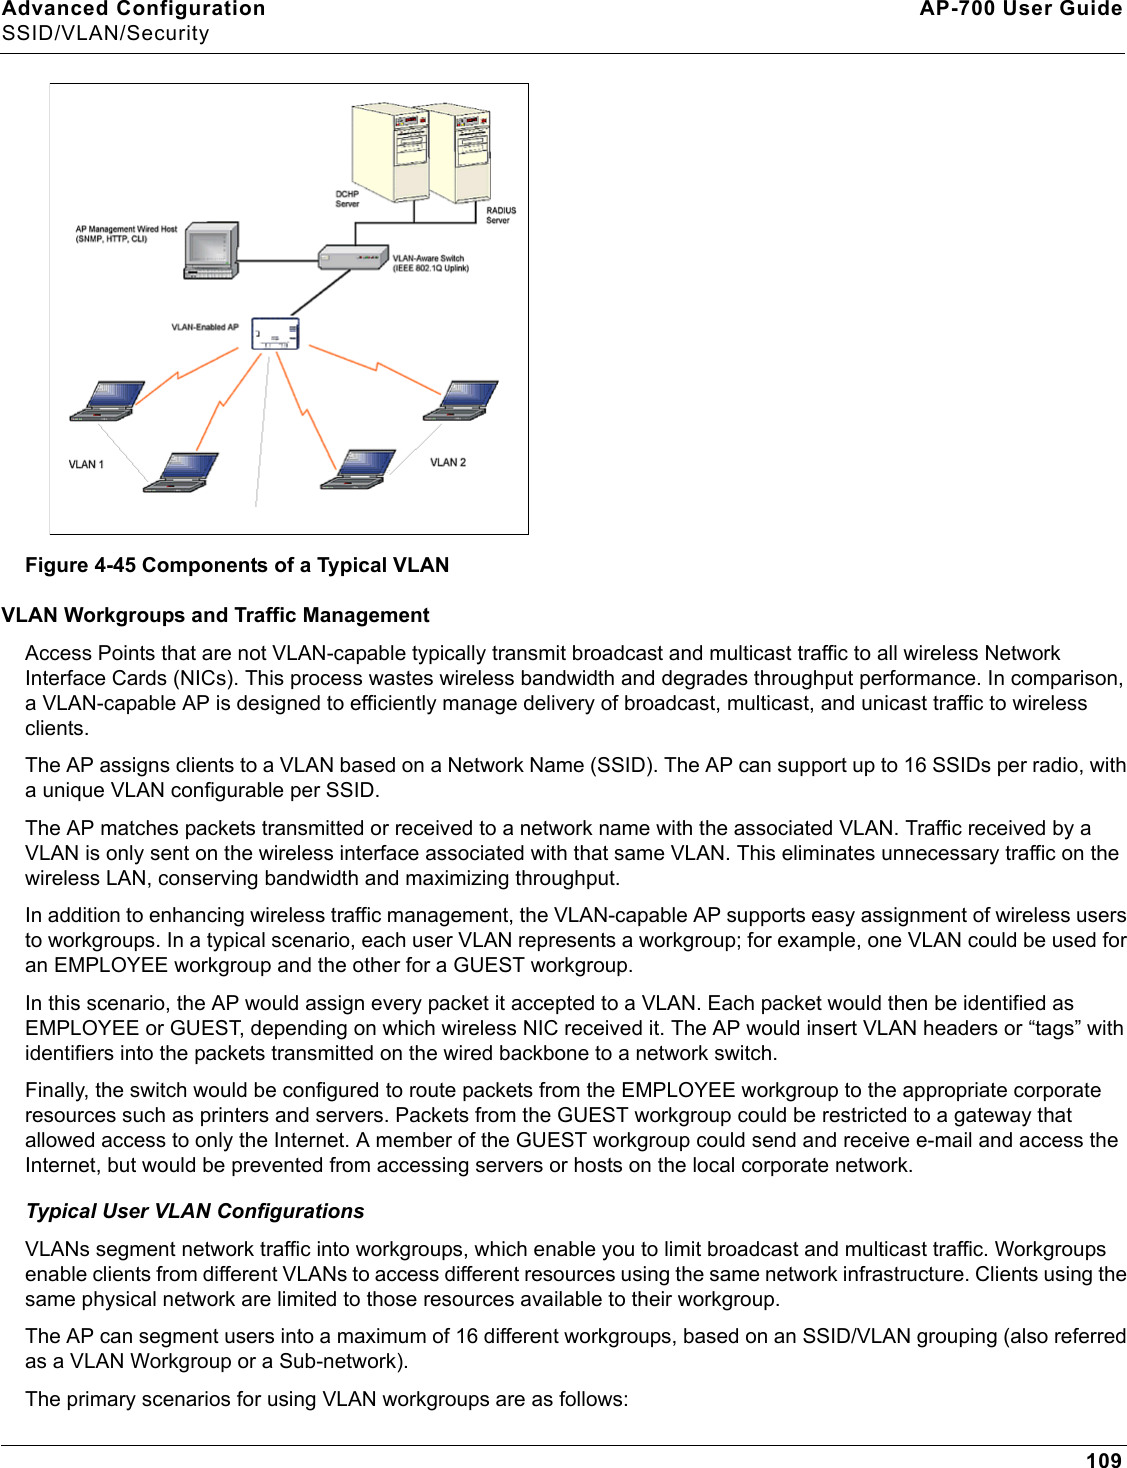 Advanced Configuration AP-700 User GuideSSID/VLAN/Security109Figure 4-45 Components of a Typical VLANVLAN Workgroups and Traffic ManagementAccess Points that are not VLAN-capable typically transmit broadcast and multicast traffic to all wireless Network Interface Cards (NICs). This process wastes wireless bandwidth and degrades throughput performance. In comparison, a VLAN-capable AP is designed to efficiently manage delivery of broadcast, multicast, and unicast traffic to wireless clients. The AP assigns clients to a VLAN based on a Network Name (SSID). The AP can support up to 16 SSIDs per radio, with a unique VLAN configurable per SSID.The AP matches packets transmitted or received to a network name with the associated VLAN. Traffic received by a VLAN is only sent on the wireless interface associated with that same VLAN. This eliminates unnecessary traffic on the wireless LAN, conserving bandwidth and maximizing throughput.In addition to enhancing wireless traffic management, the VLAN-capable AP supports easy assignment of wireless users to workgroups. In a typical scenario, each user VLAN represents a workgroup; for example, one VLAN could be used for an EMPLOYEE workgroup and the other for a GUEST workgroup. In this scenario, the AP would assign every packet it accepted to a VLAN. Each packet would then be identified as EMPLOYEE or GUEST, depending on which wireless NIC received it. The AP would insert VLAN headers or “tags” with identifiers into the packets transmitted on the wired backbone to a network switch. Finally, the switch would be configured to route packets from the EMPLOYEE workgroup to the appropriate corporate resources such as printers and servers. Packets from the GUEST workgroup could be restricted to a gateway that allowed access to only the Internet. A member of the GUEST workgroup could send and receive e-mail and access the Internet, but would be prevented from accessing servers or hosts on the local corporate network.Typical User VLAN ConfigurationsVLANs segment network traffic into workgroups, which enable you to limit broadcast and multicast traffic. Workgroups enable clients from different VLANs to access different resources using the same network infrastructure. Clients using the same physical network are limited to those resources available to their workgroup. The AP can segment users into a maximum of 16 different workgroups, based on an SSID/VLAN grouping (also referred as a VLAN Workgroup or a Sub-network).The primary scenarios for using VLAN workgroups are as follows: